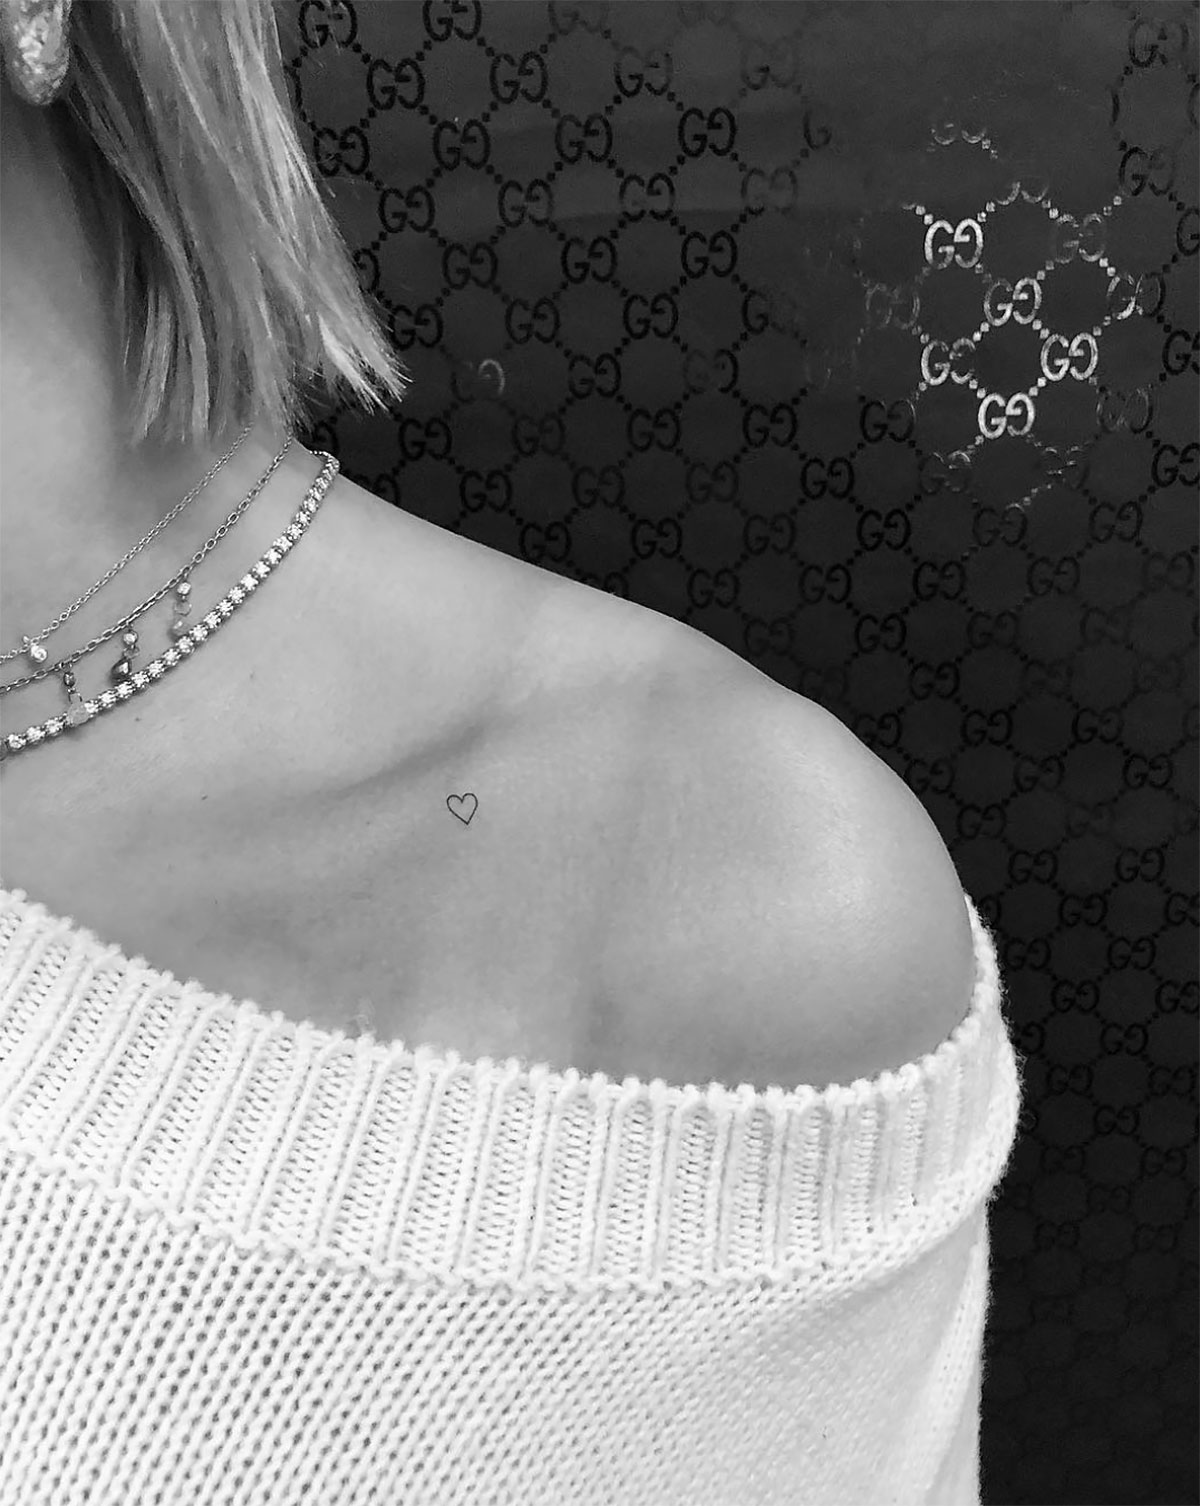 Hailey Bieber Just Got A New Neck Tattoo—See The Pics! - SHEfinds